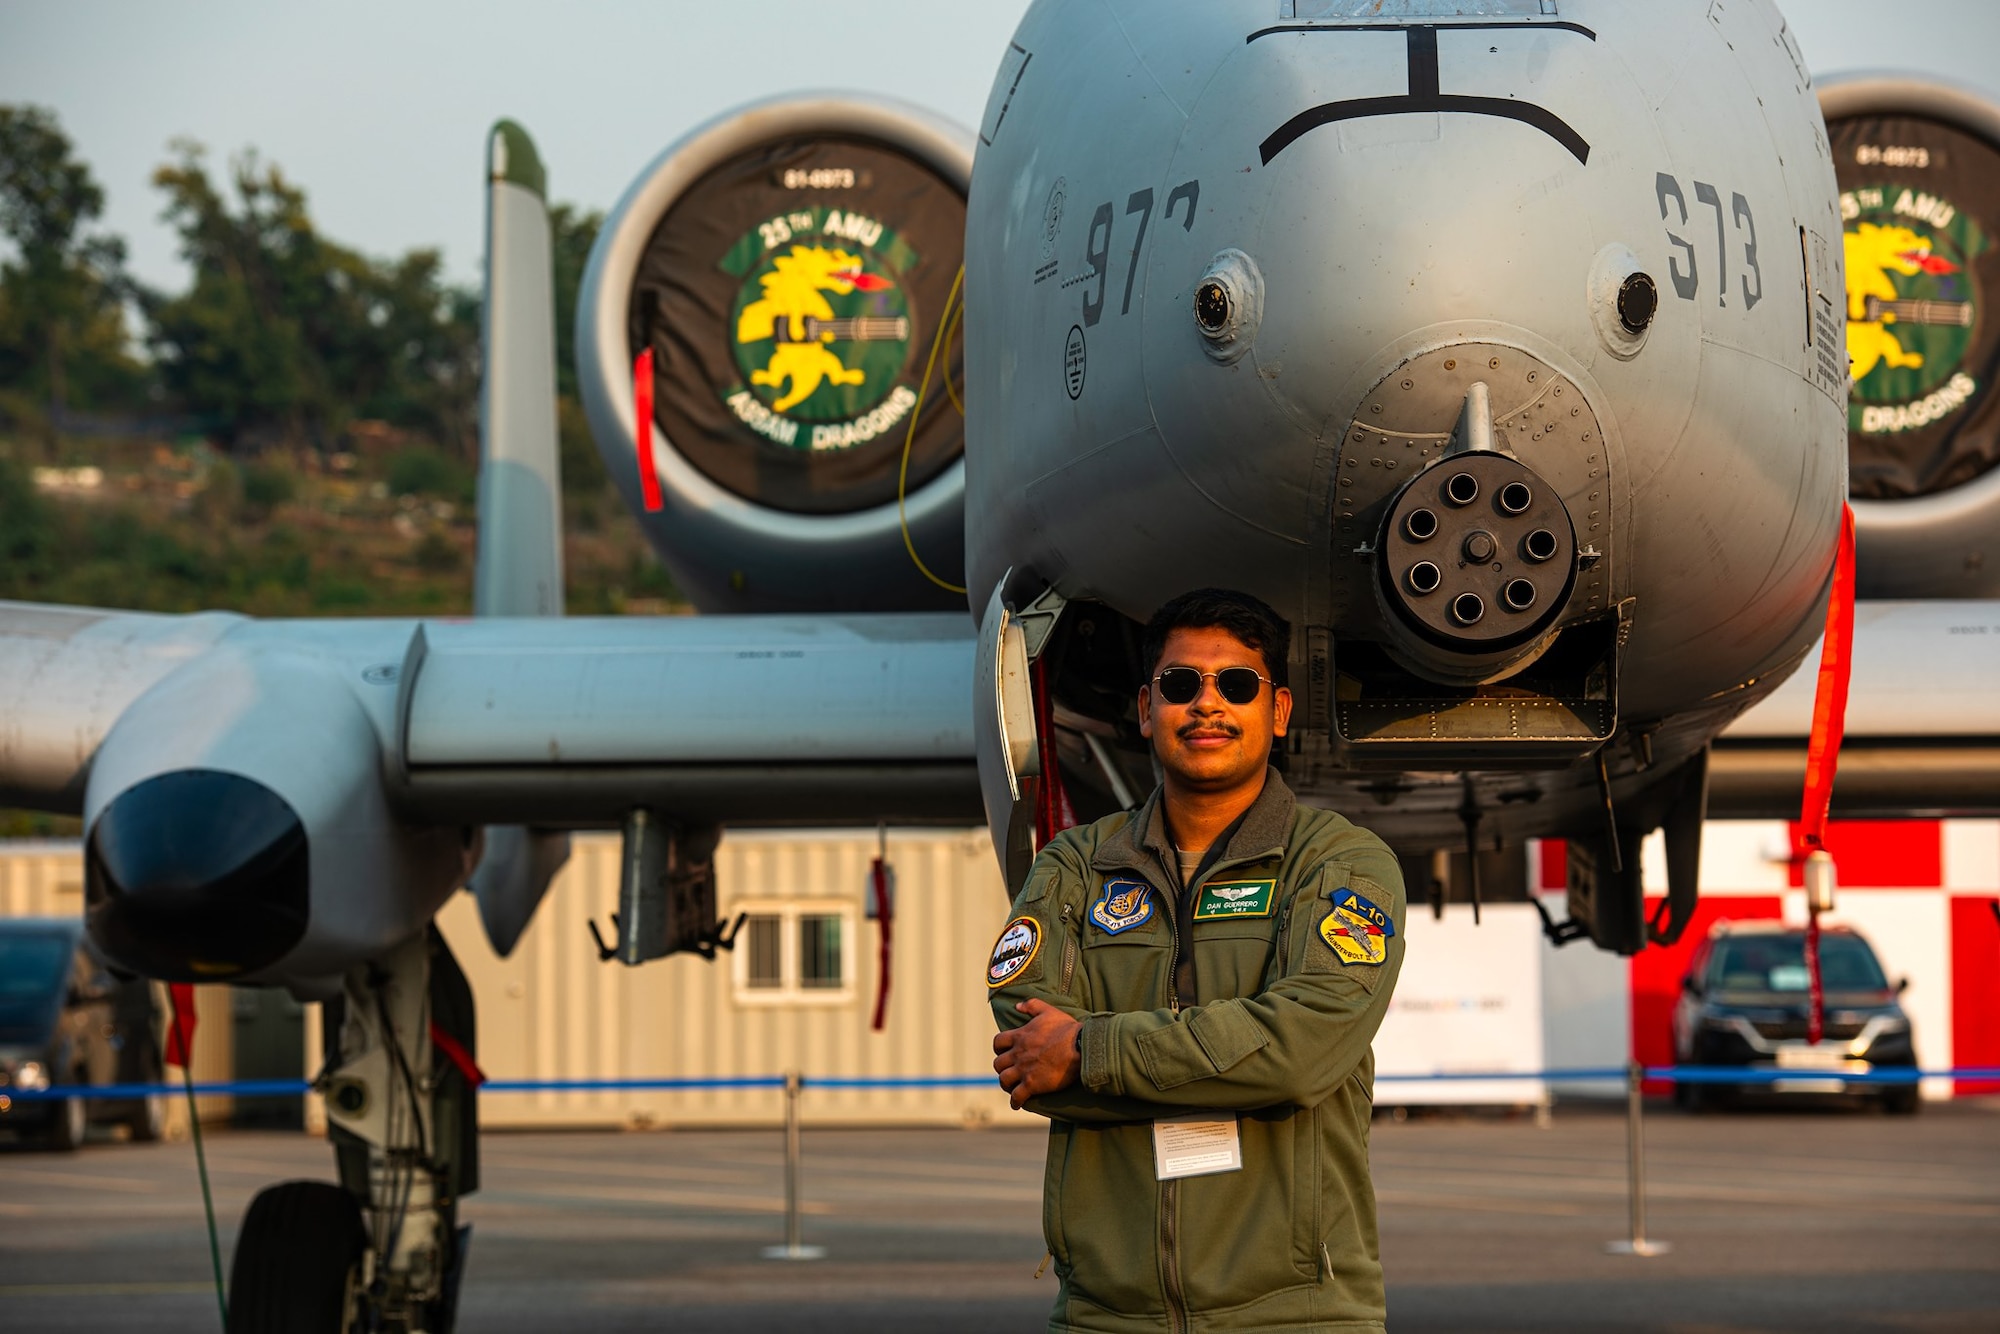 1st Lt. Daniel Guerrero, 25th Fighter Wing Squadron A-10 Thunderbolt II pilot, stands with the A-10 static display at the Seoul International Aerospace and Defense Exhibition, also known as Seoul ADEX 21, Oct. 21, 2021. Seoul ADEX 21 is the largest, most comprehensive event of its kind in Northeast Asia, attracting aviation, aerospace professionals, key defense personnel, aviation enthusiasts and the general public alike.